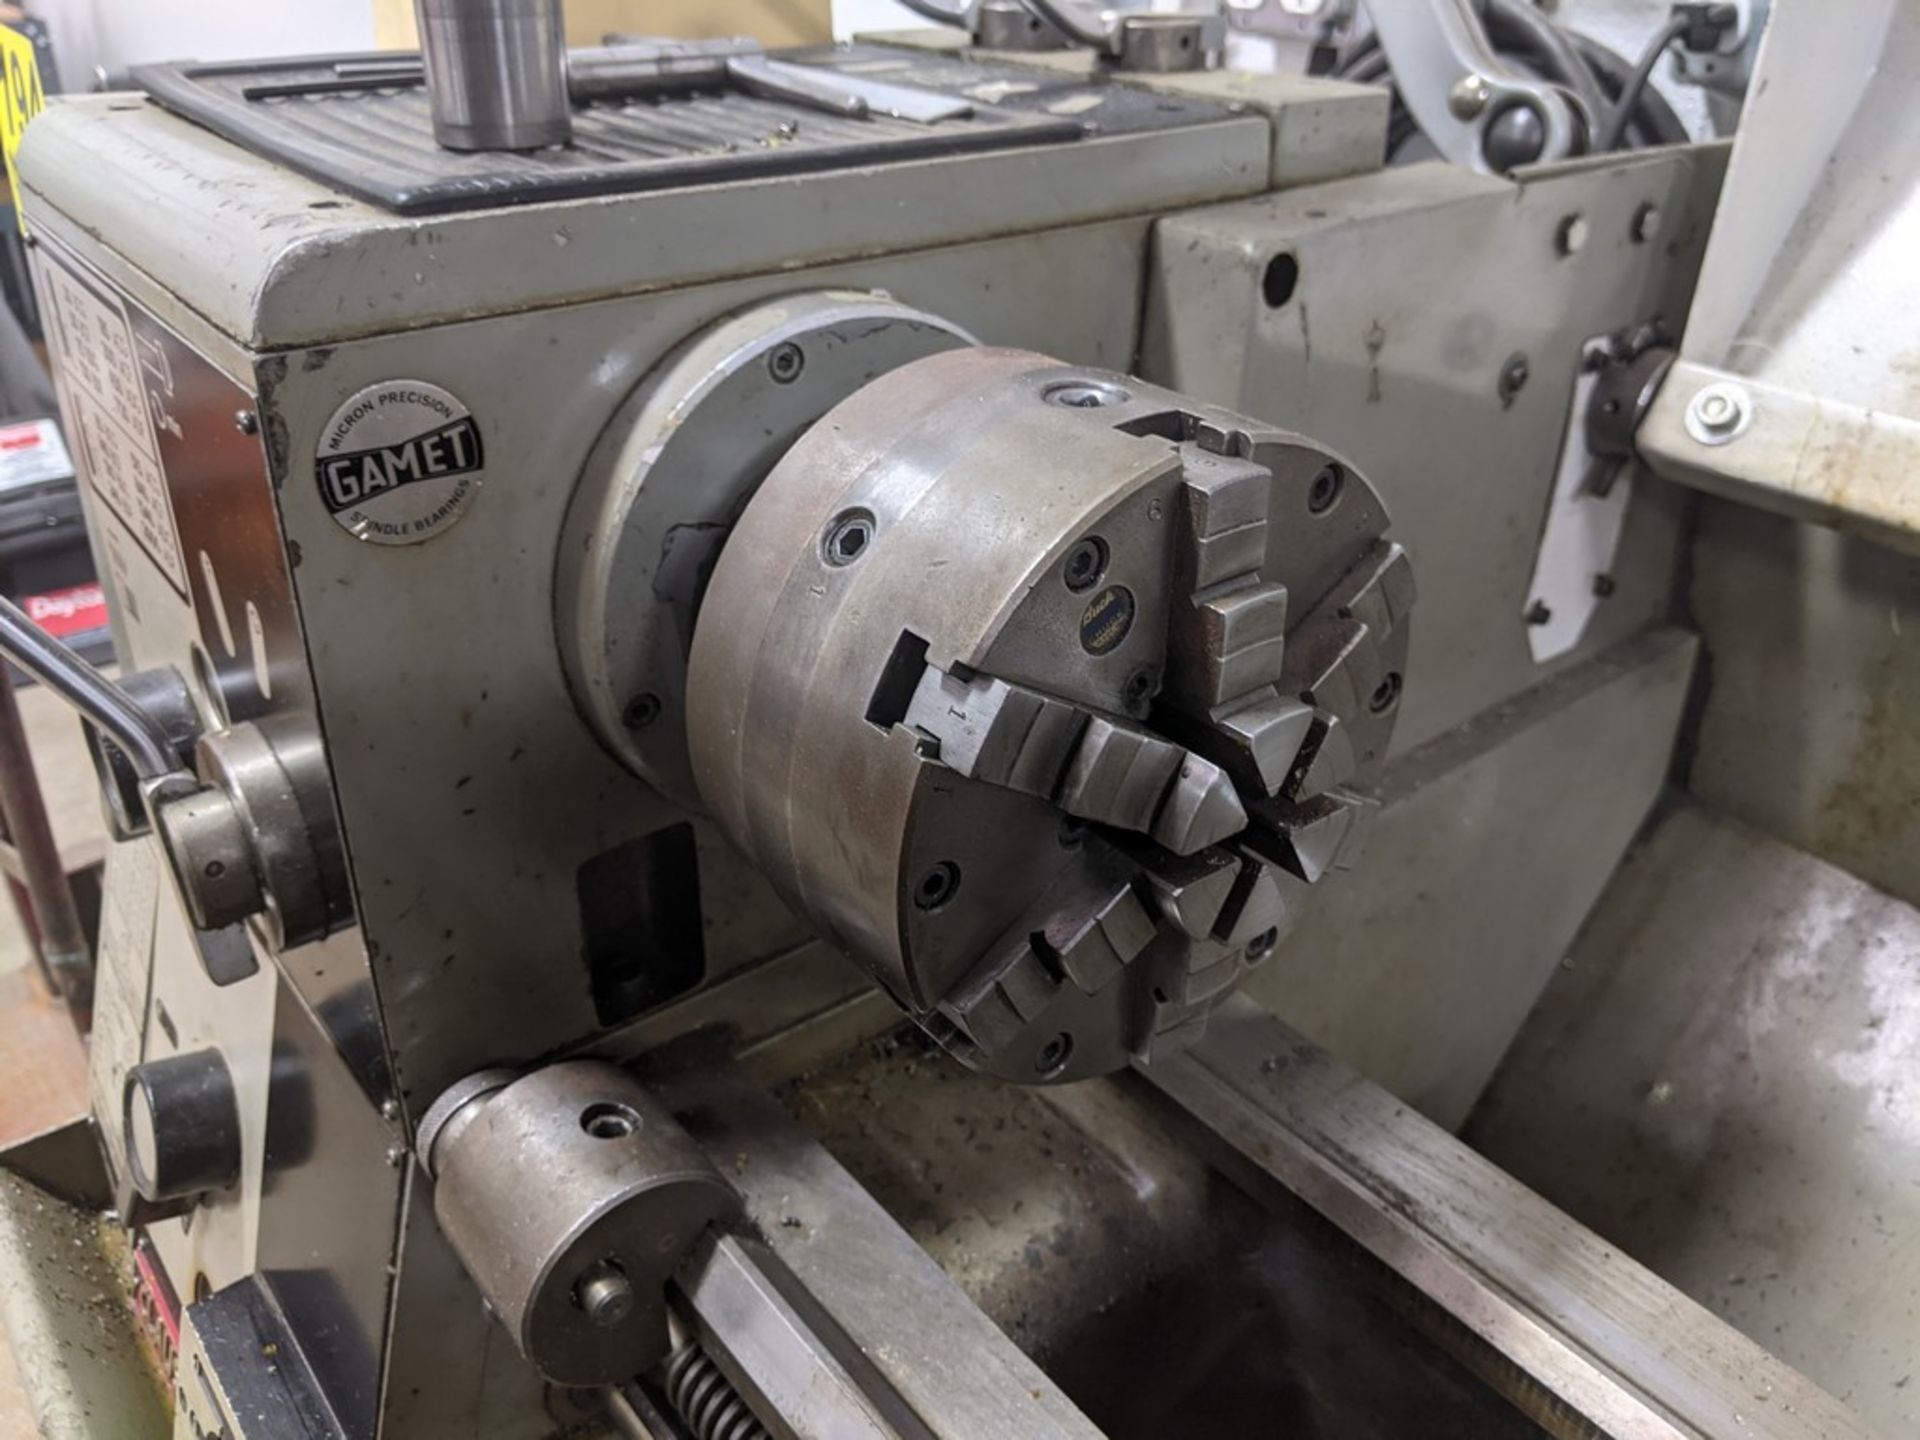 CLAUSING COLCHESTER 11”X40” TOOL ROOM LATHE, S/N 2/0021/01702, 2000 RPM SPINDLE, 6” 6 JAW CHUCK, - Image 5 of 8